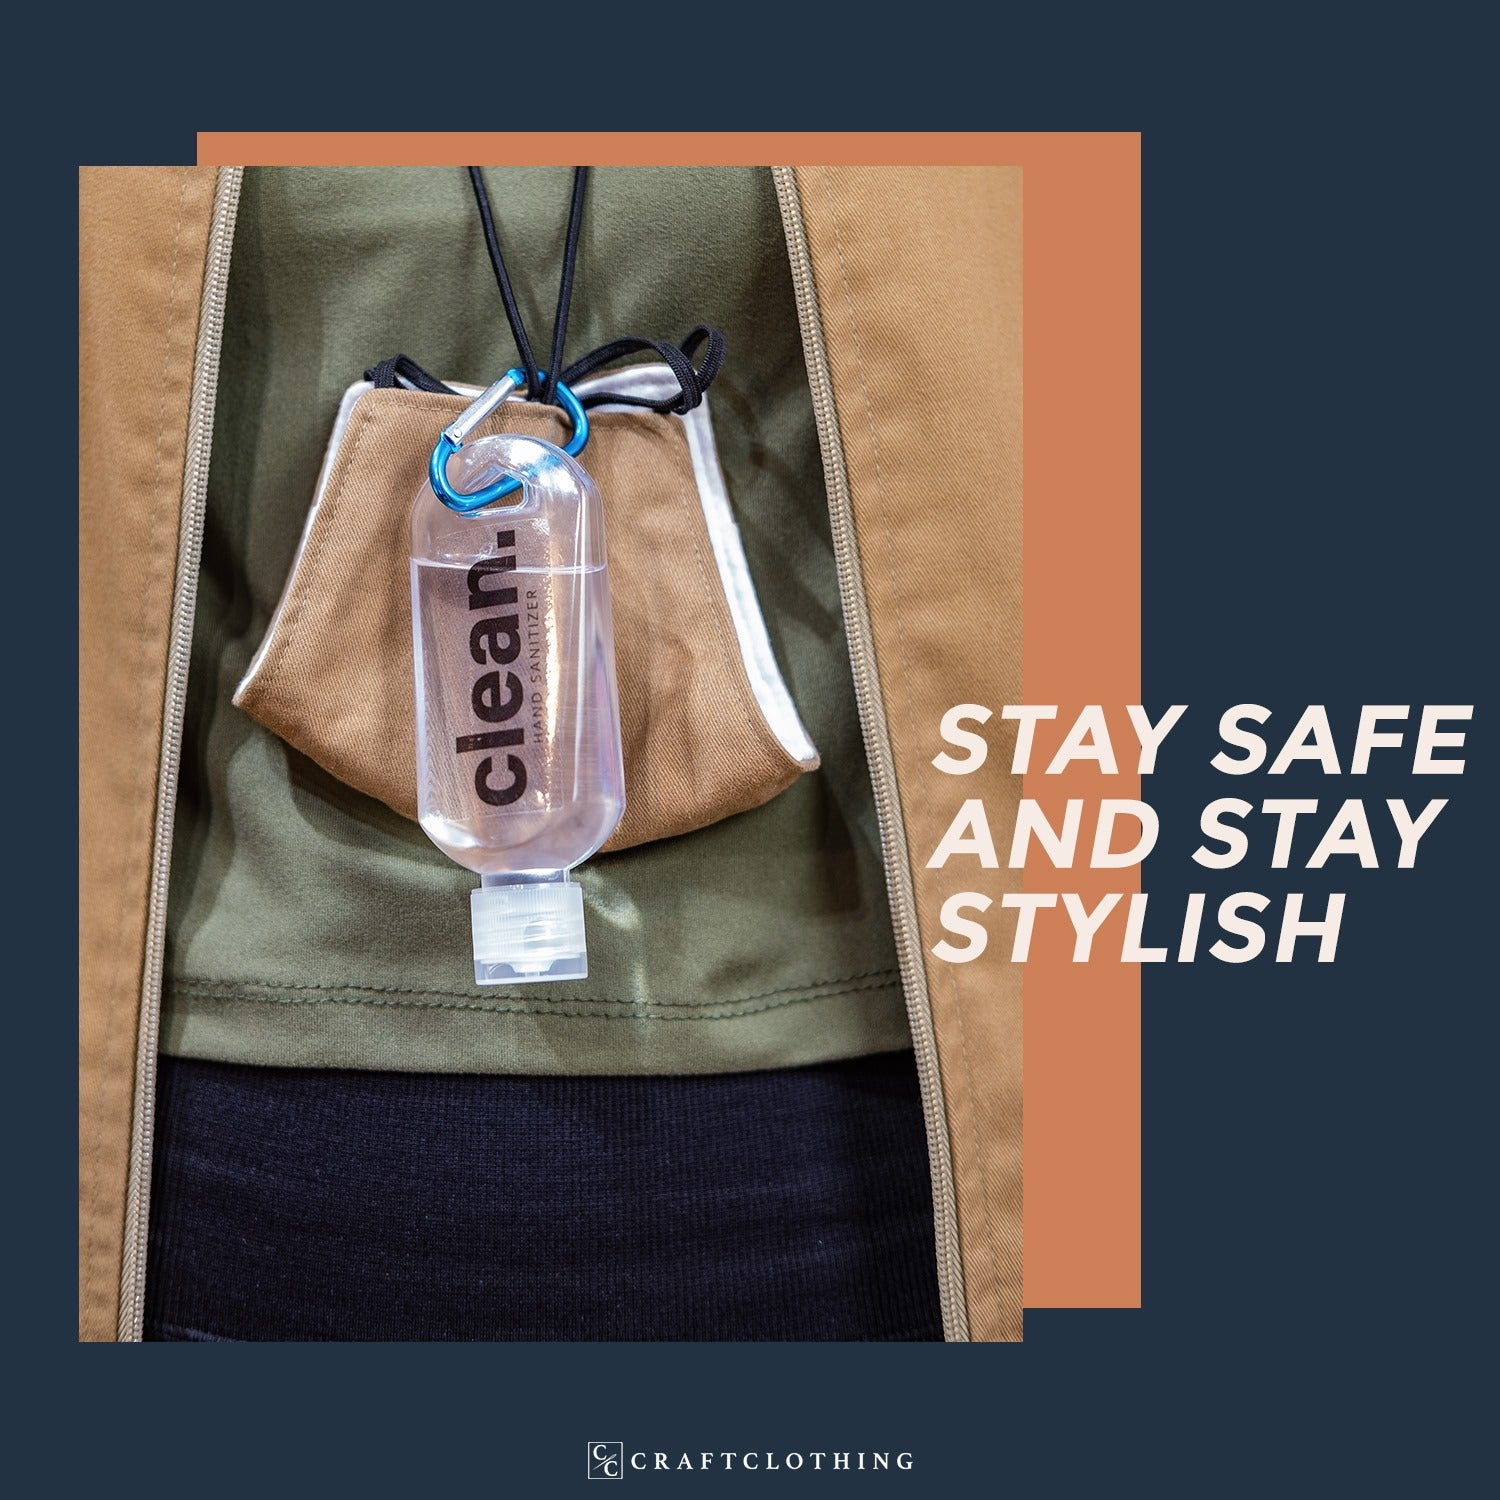 STAY SAFE AND STAY STYLISH